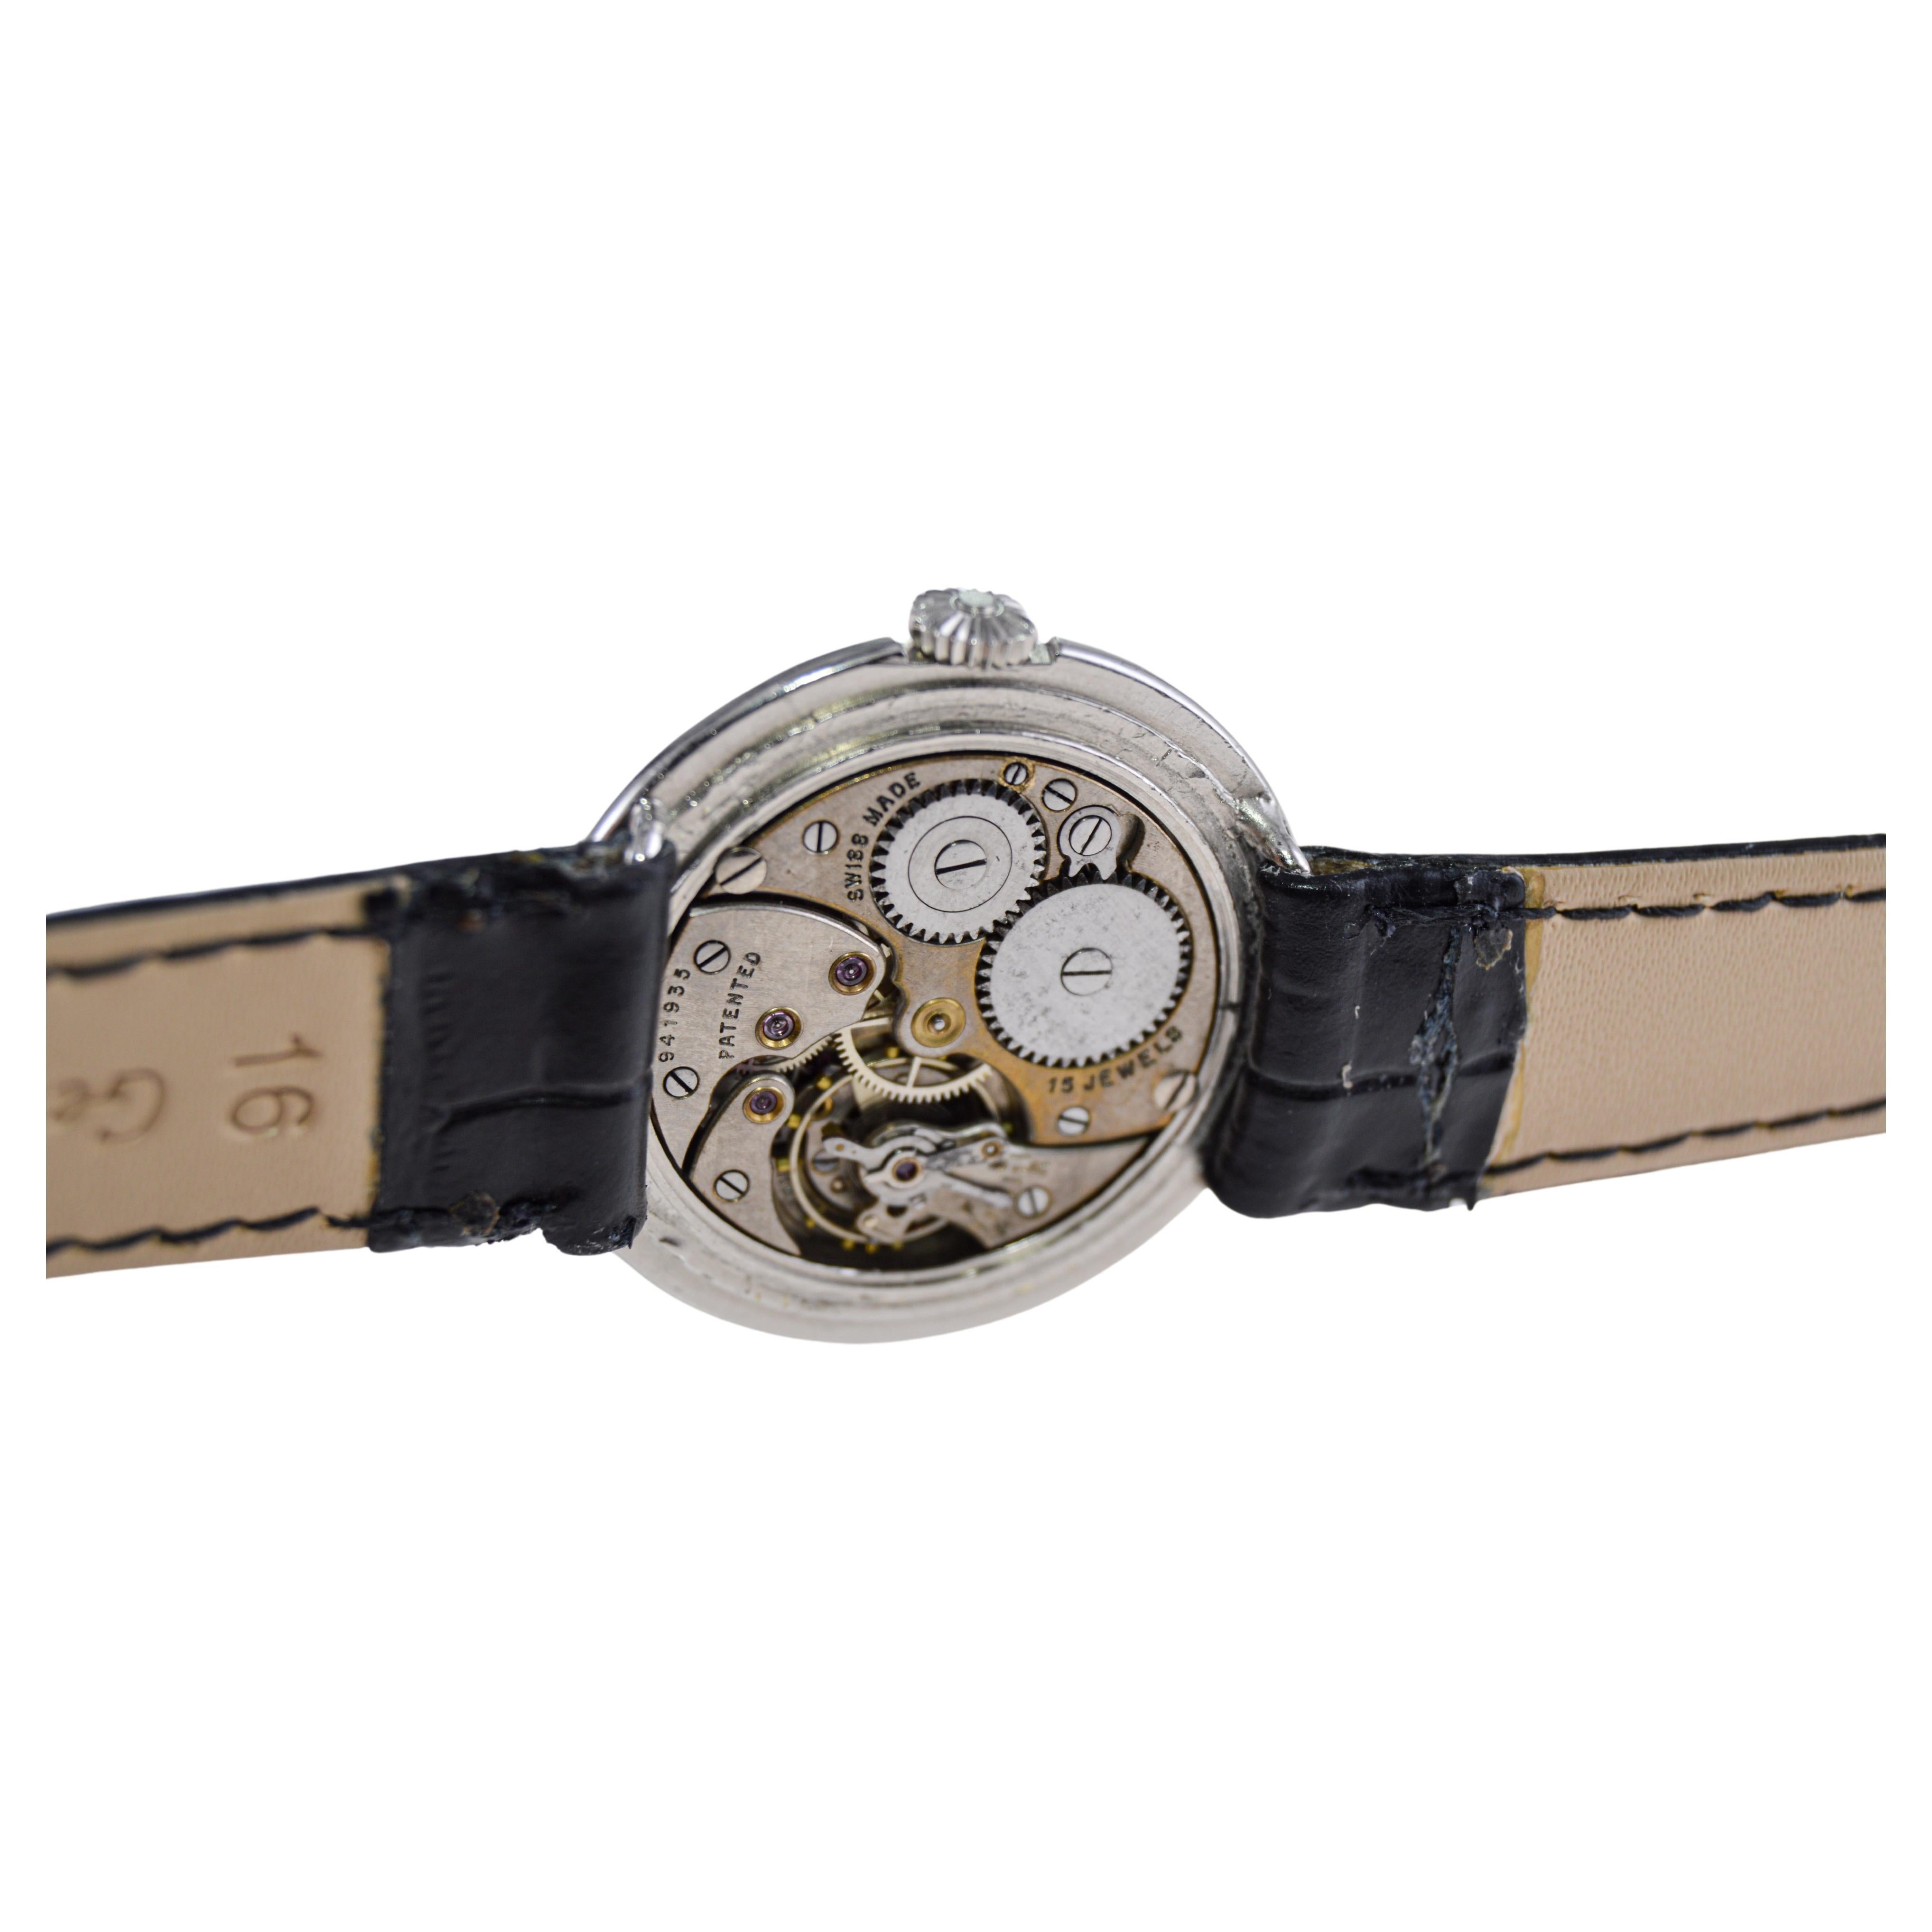 J.W Benson White Gold-Filled Watch circa 1930's with Kiln Fired Enamel Dial  For Sale 3